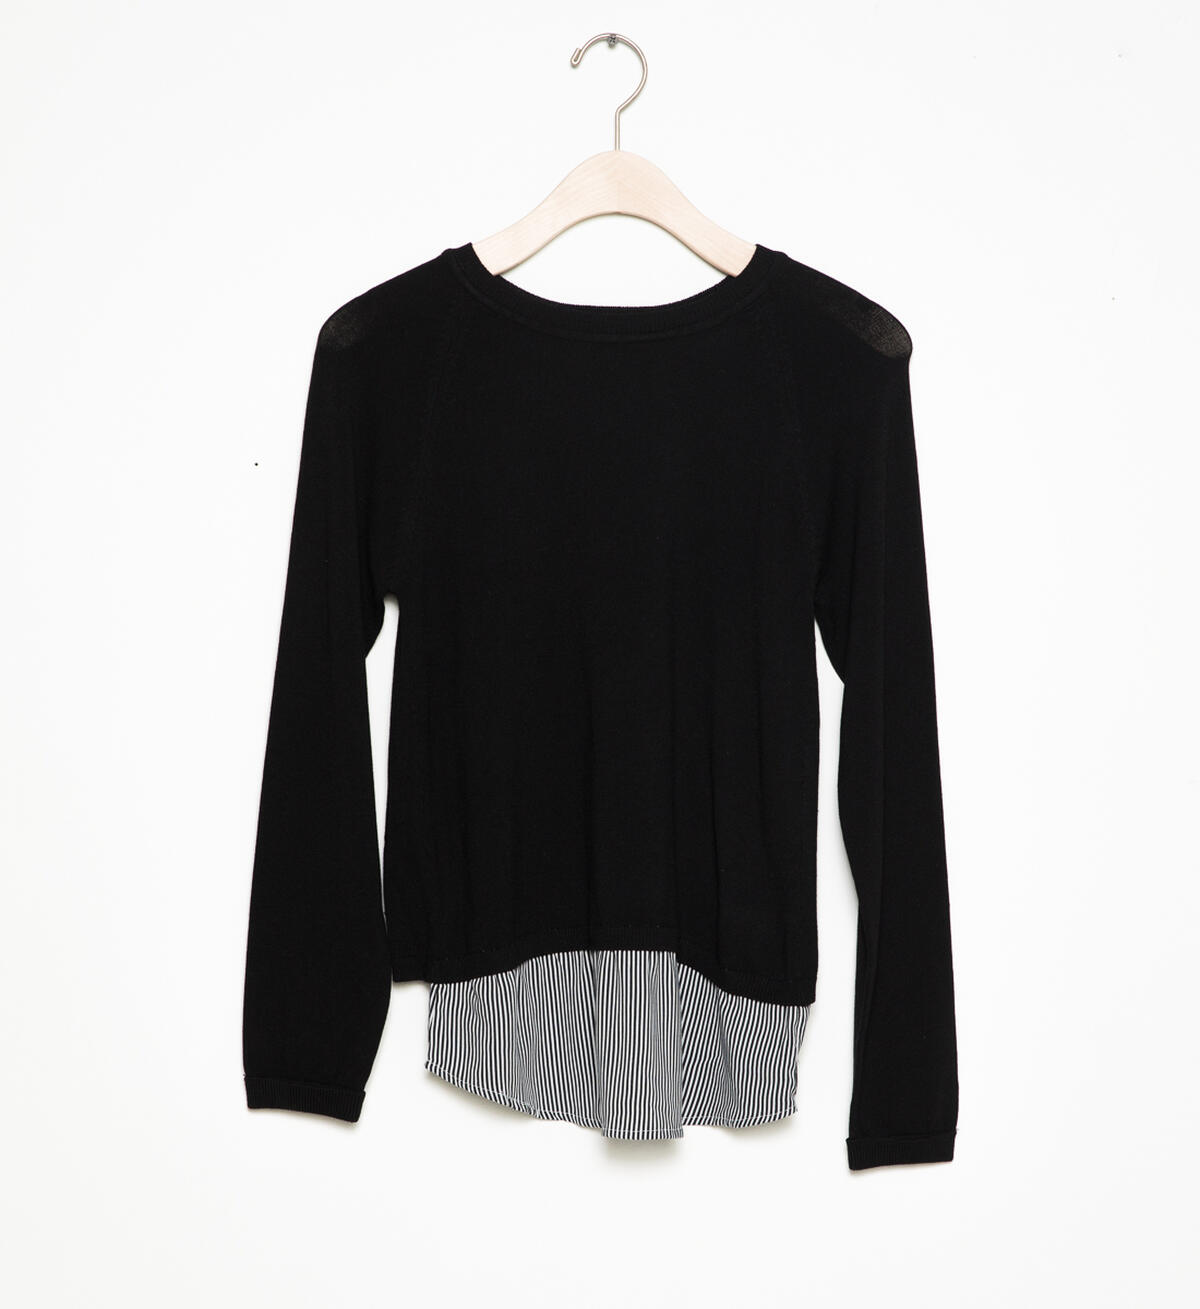 Long-Sleeve Layered Sweater (7-16), , hi-res image number 0